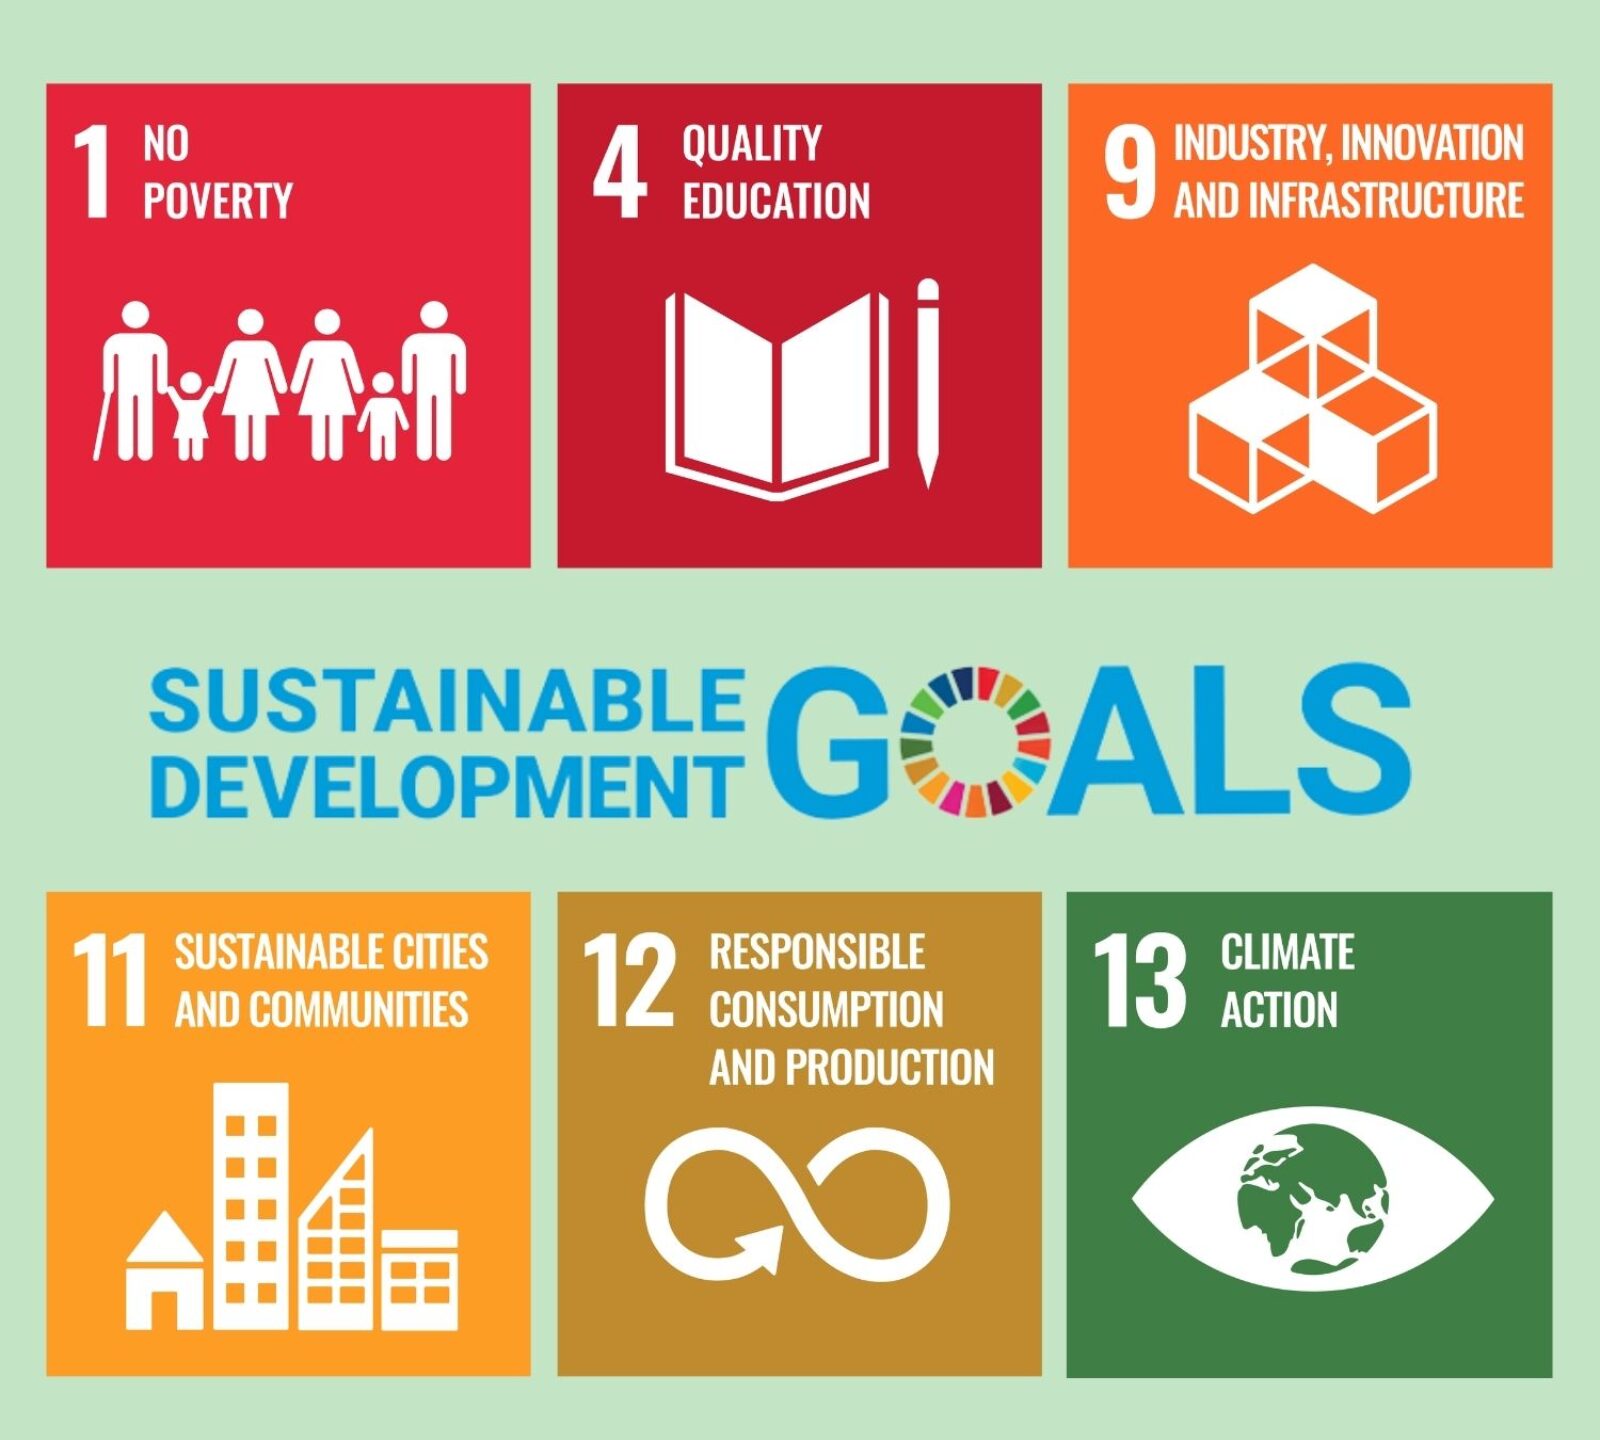 If your organization supports the SDGs, we can enhance that commitment